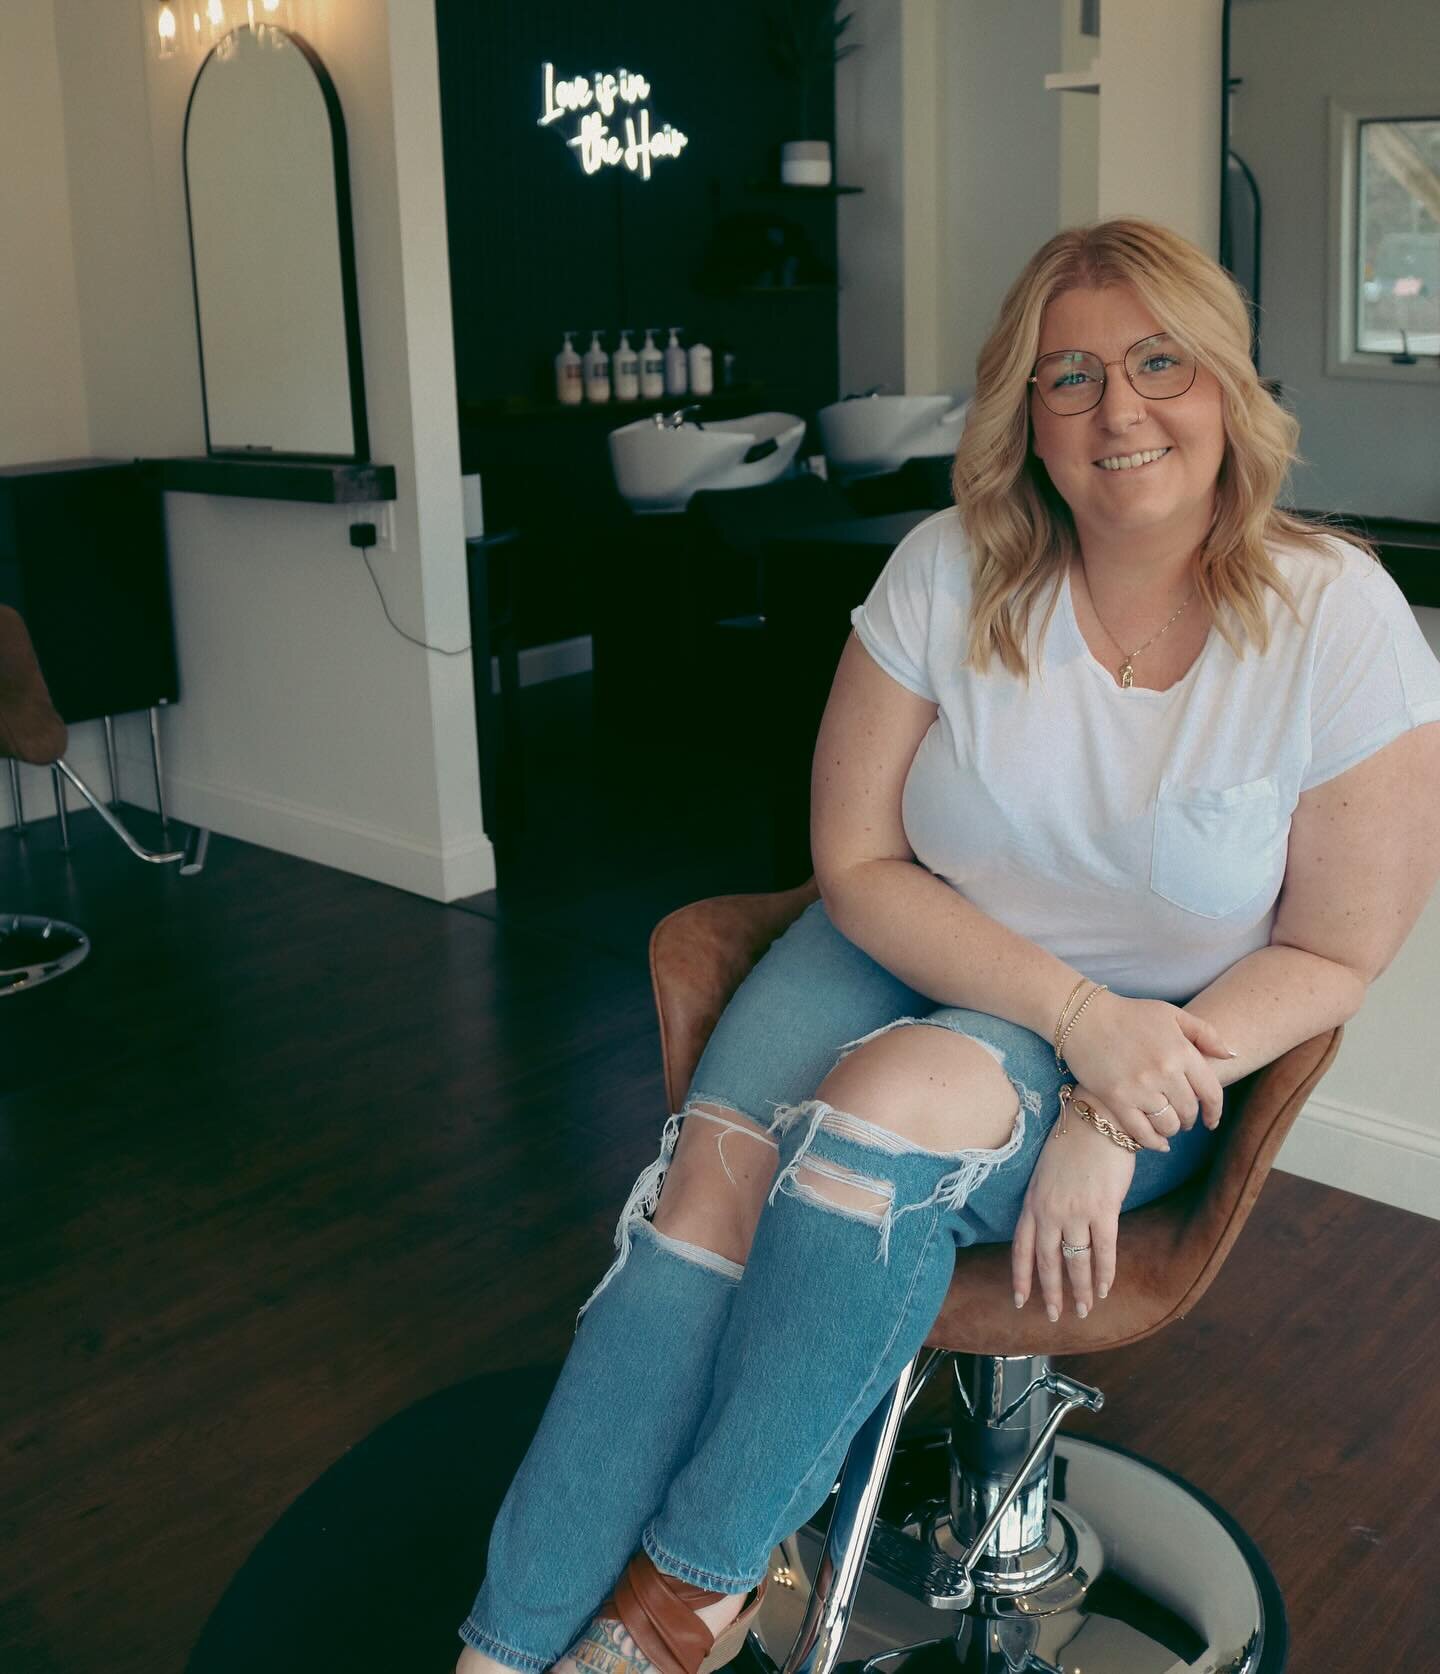 And ANOTHER addition, last but not least, welcome to Marcy! Marcy will be starting to take her clients at Lisa Marie Hair Co. in April as well. I&rsquo;m honored to provide a salon home for great experienced stylists like Marcy and I can&rsquo;t wait